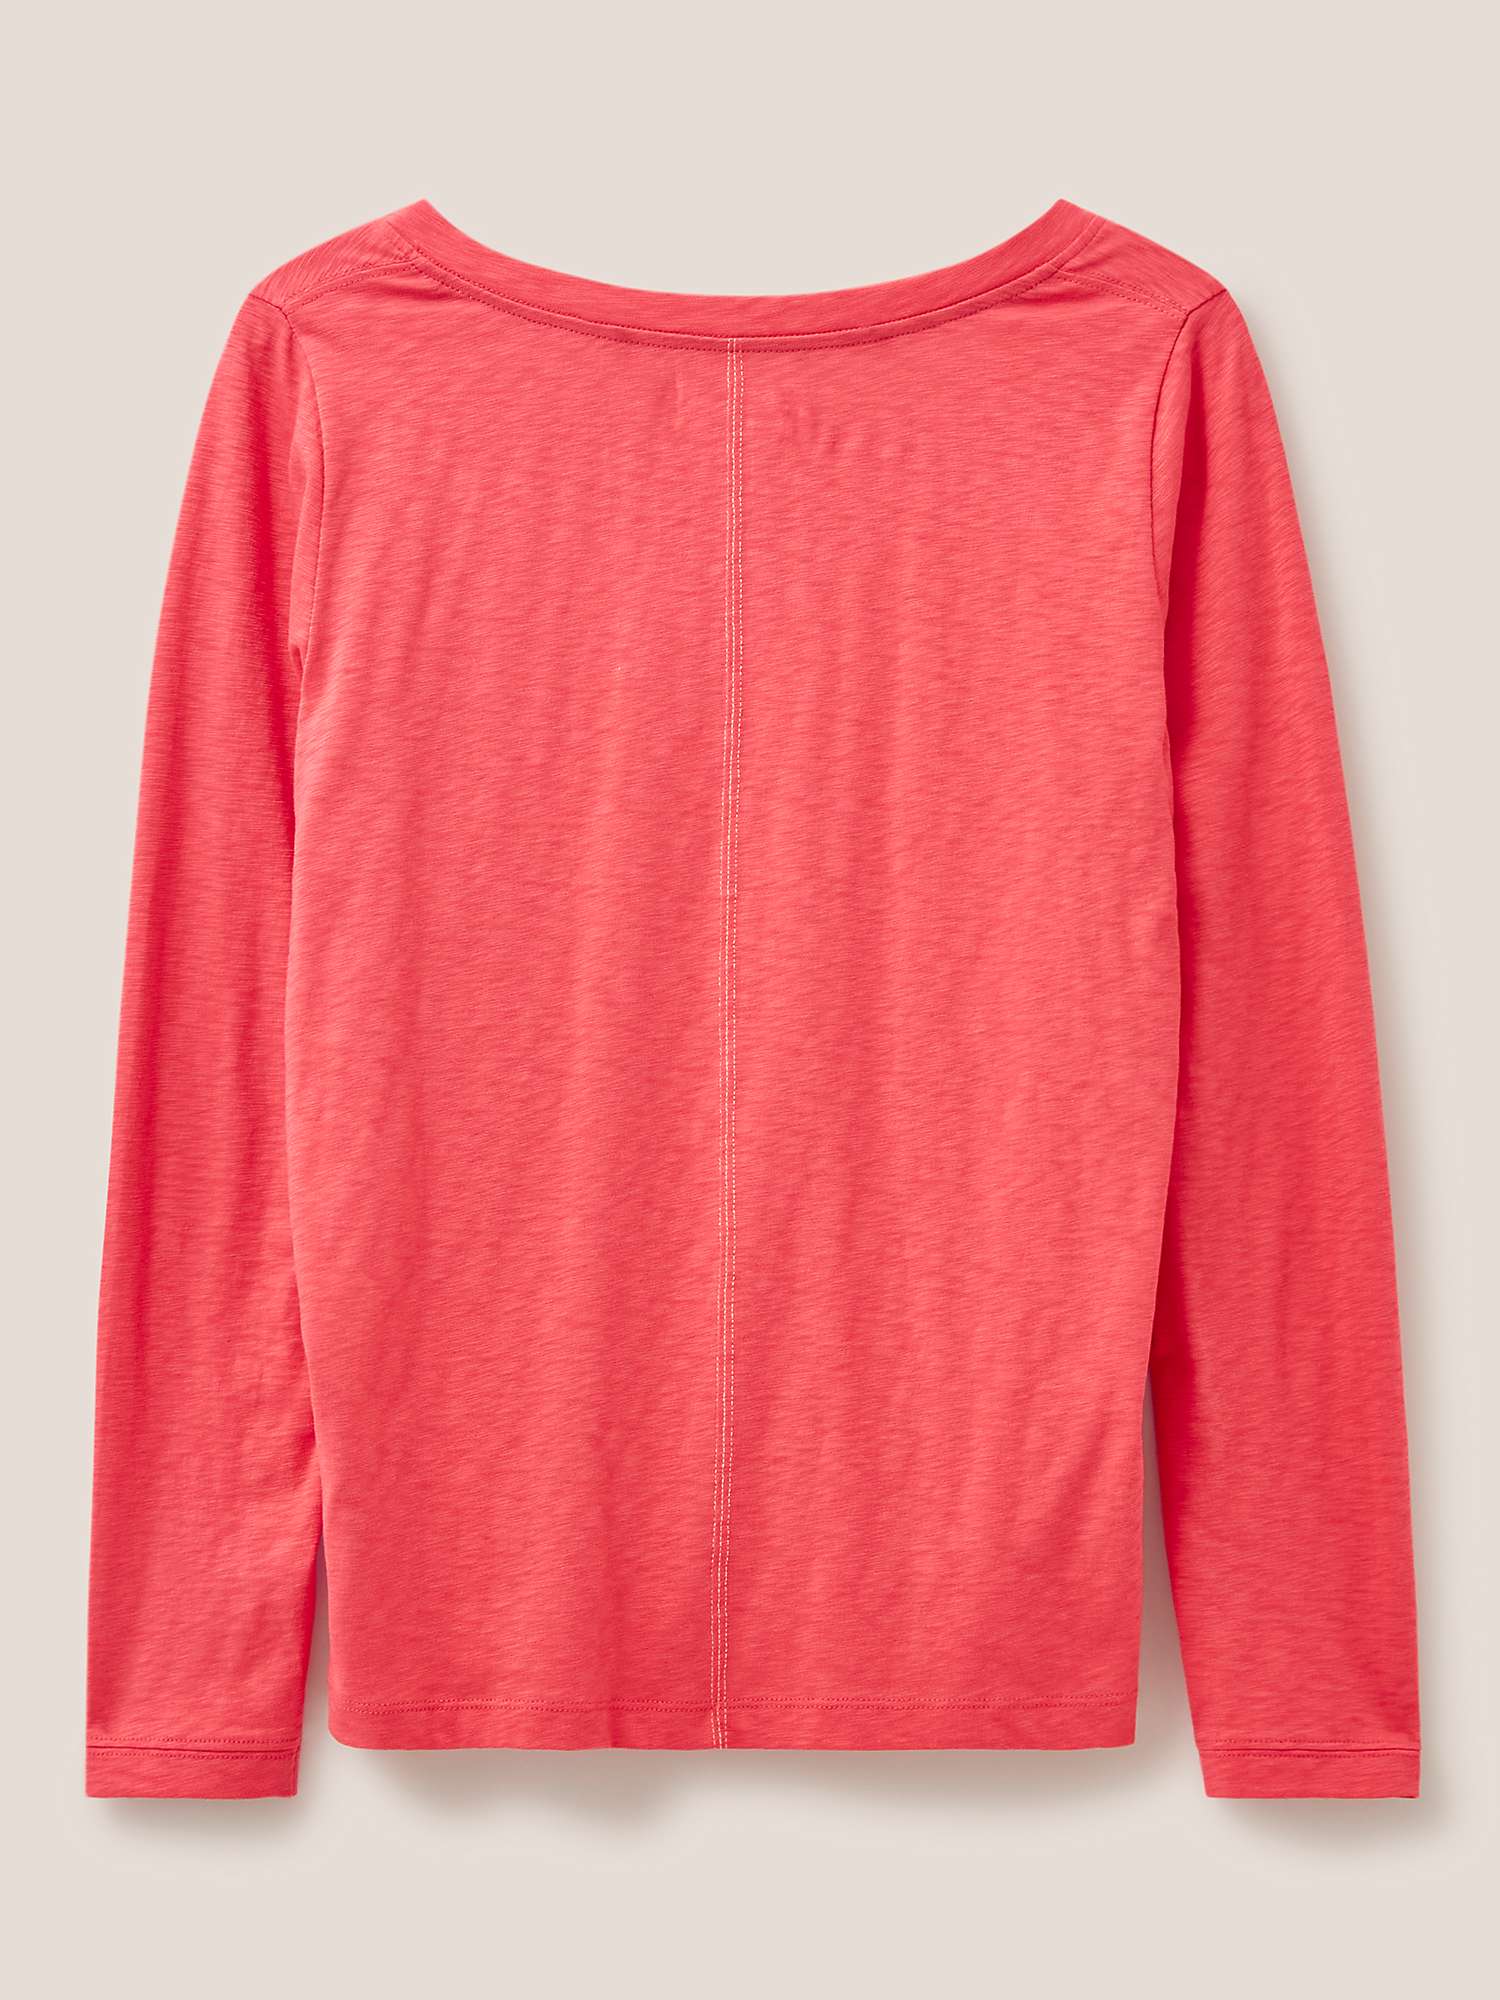 White Stuff Nelly Long Sleeve Printed Cotton Top, Pink at John Lewis ...